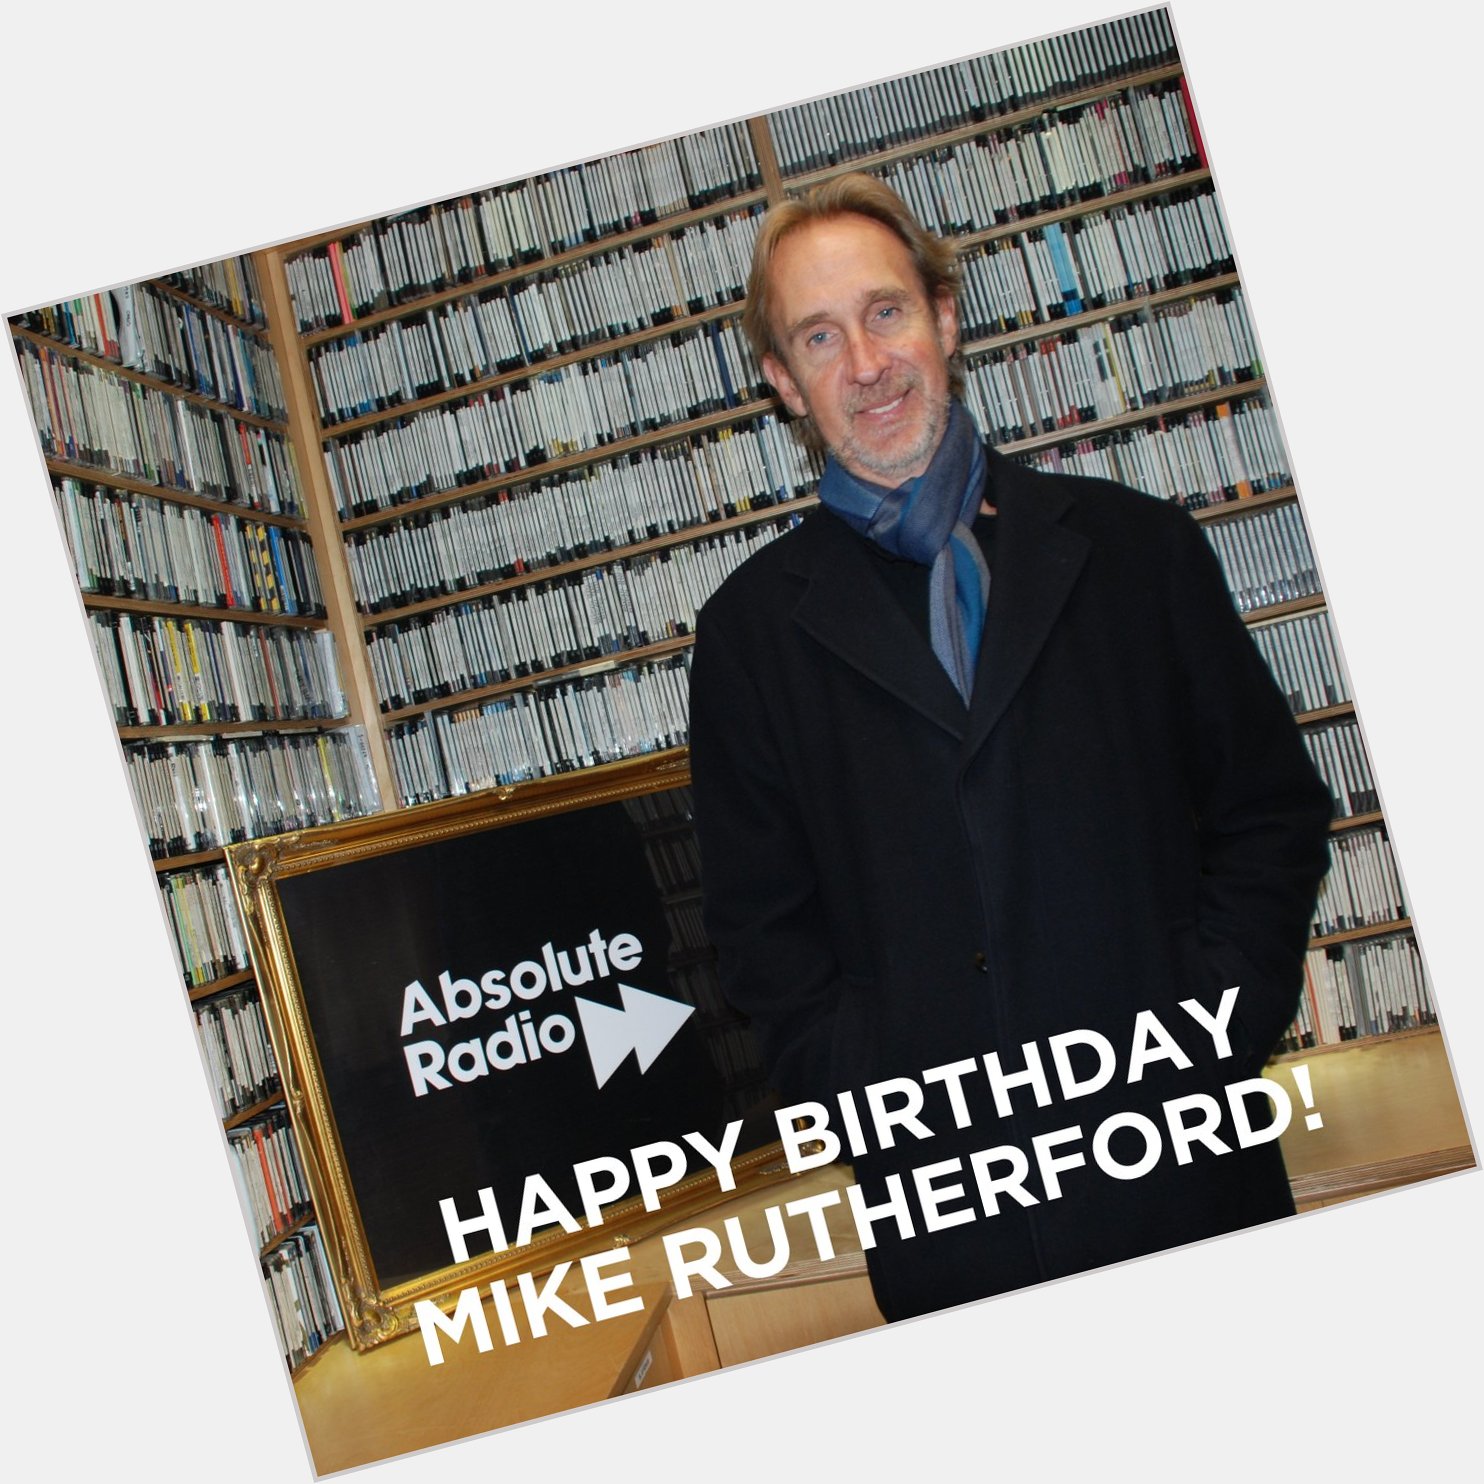 A very happy birthday to Mike Rutherford of Genesis, Mike + The Mechanics and more! 